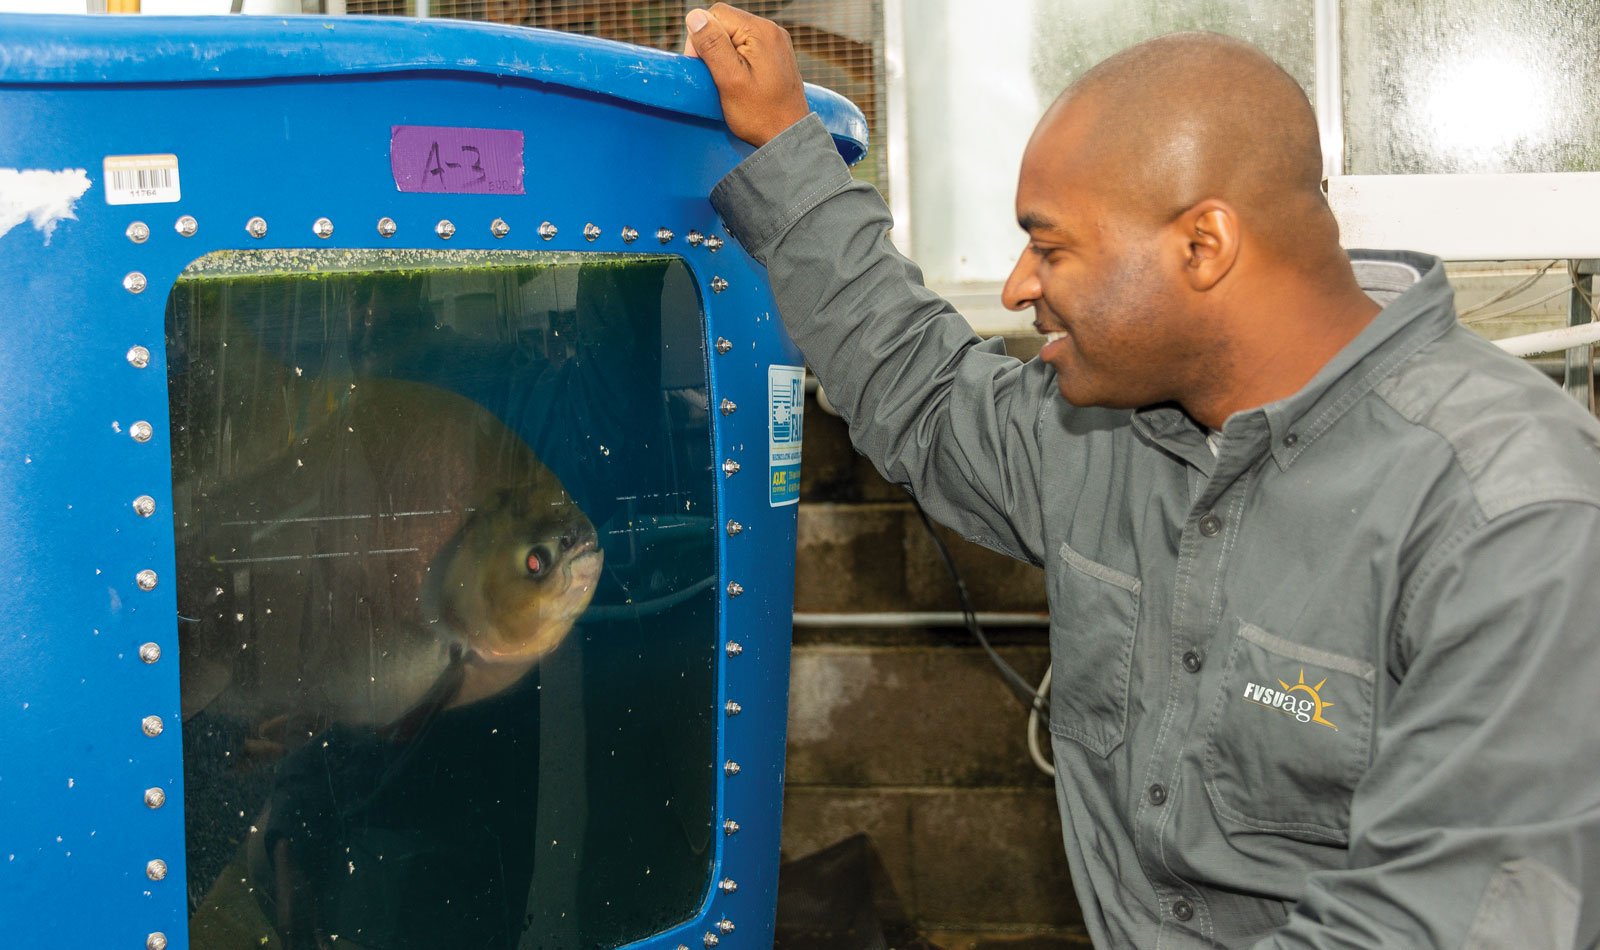 Donald Bacoat, FVSU extension aquaculture carpenter and production assistant, observes a large fish in one of the tanks at the FVSU aquaculture facility.